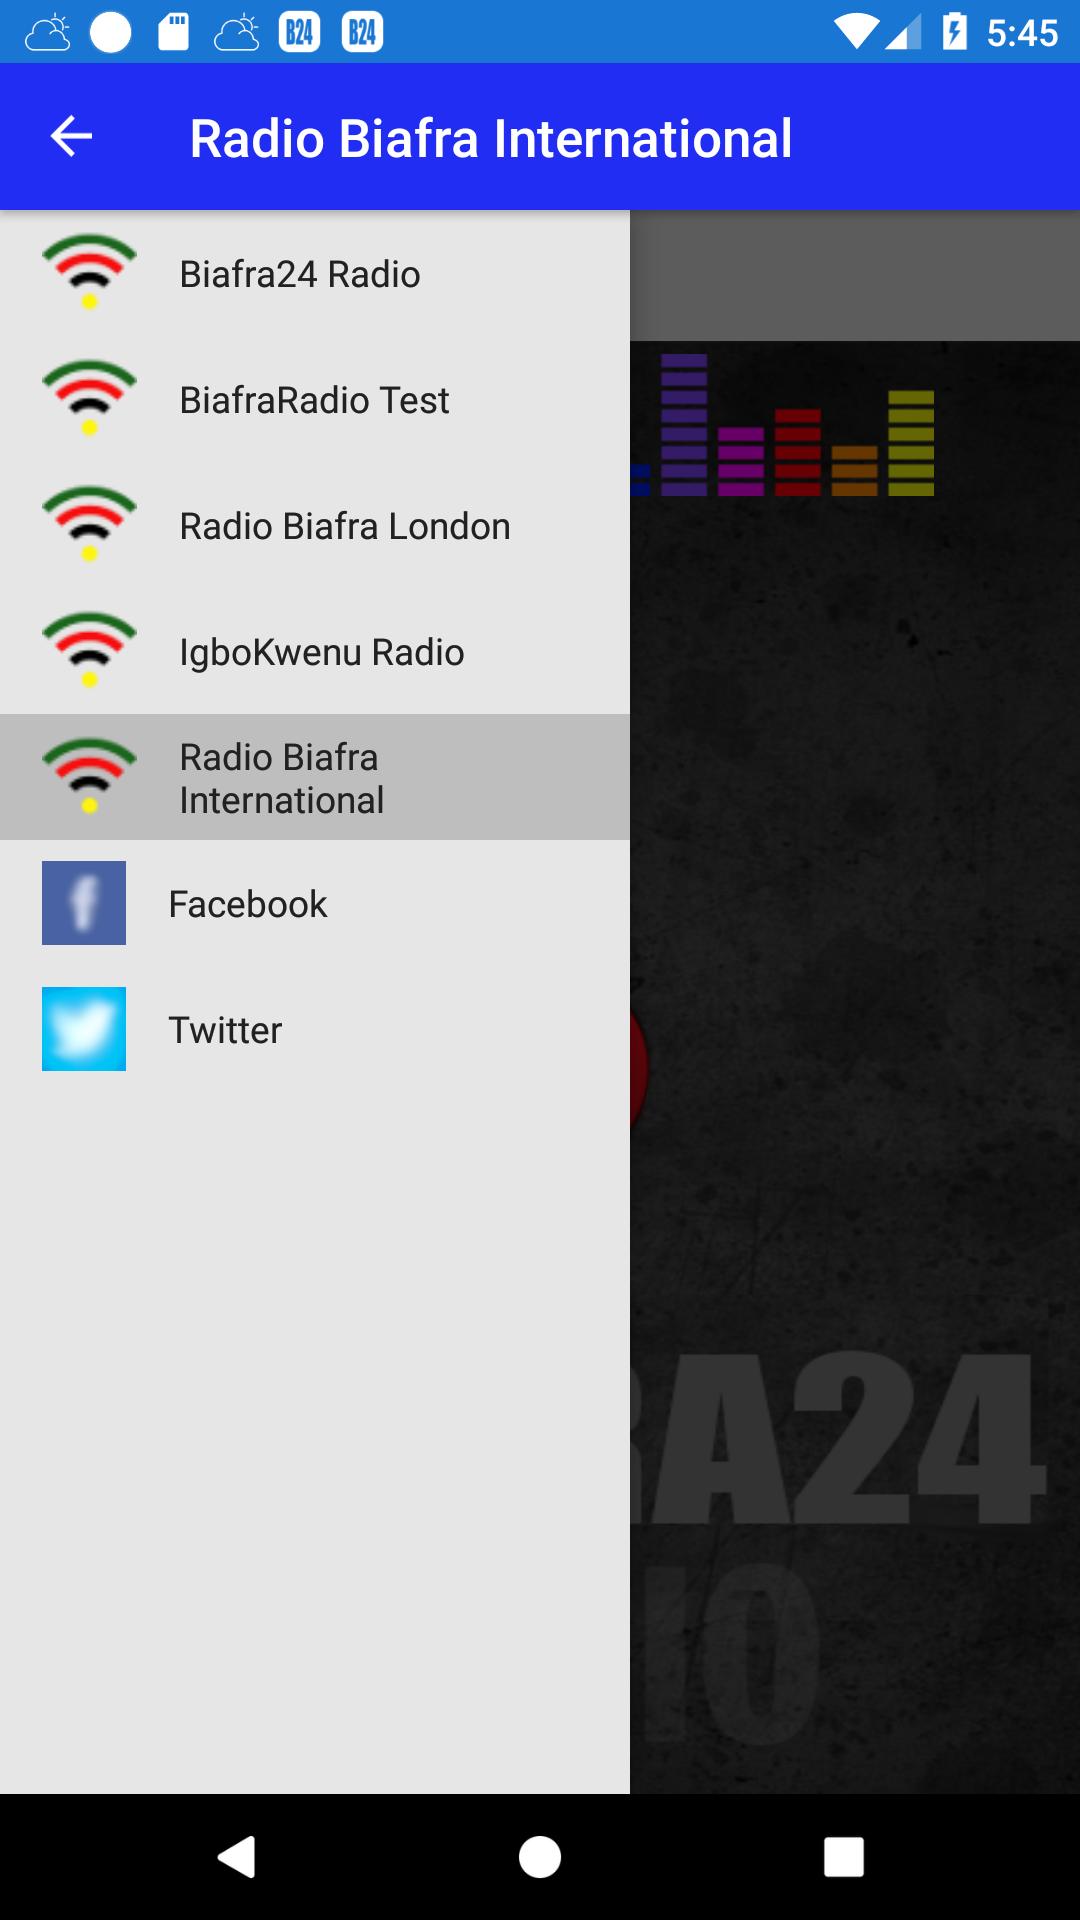 Biafra 24 Radio News for Android - APK Download